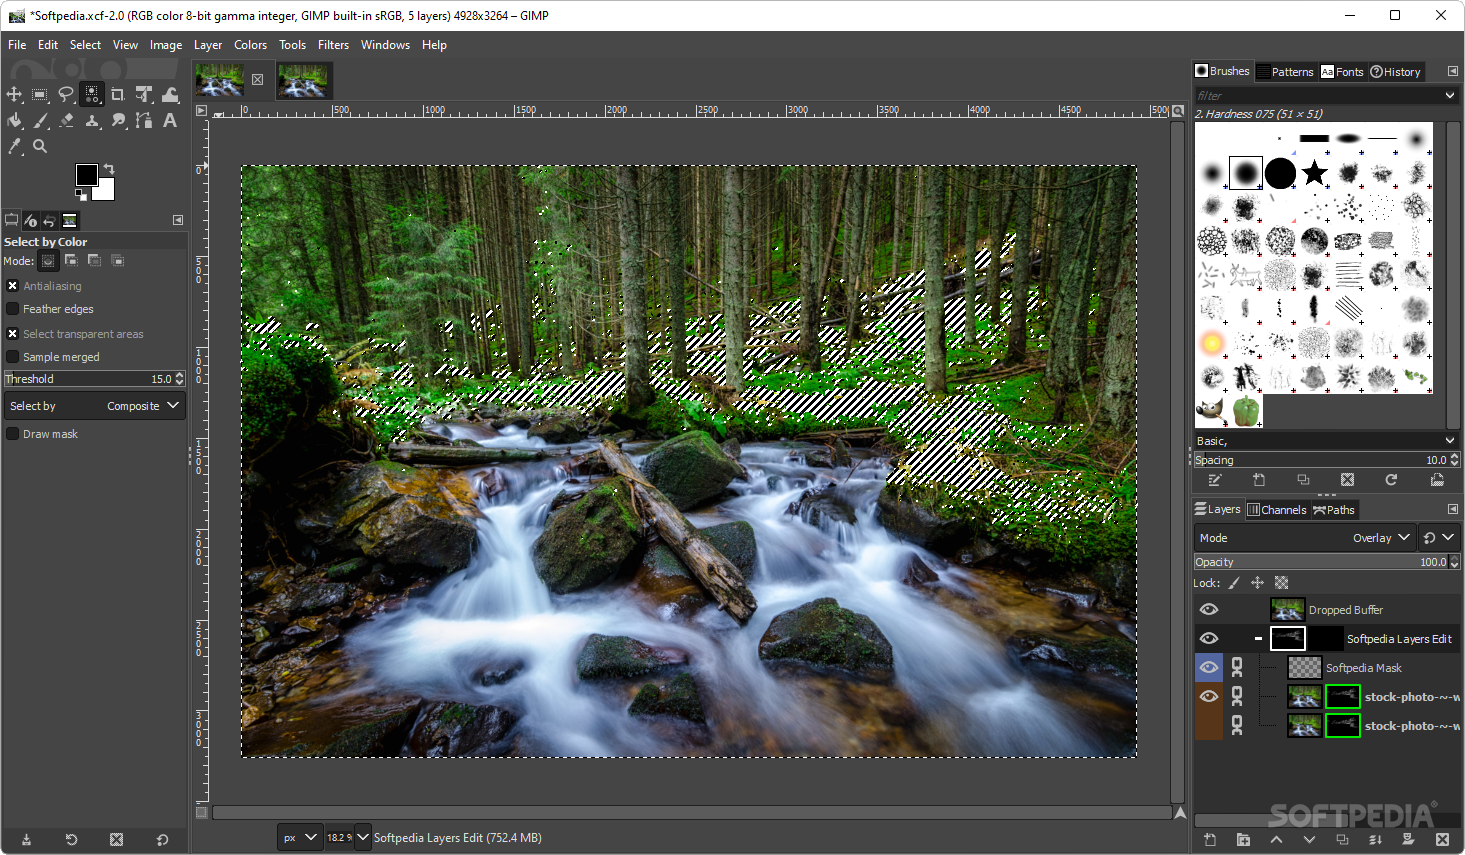 GIMP Review: Capable Graphics Editor That Falls Short of Its Competitors